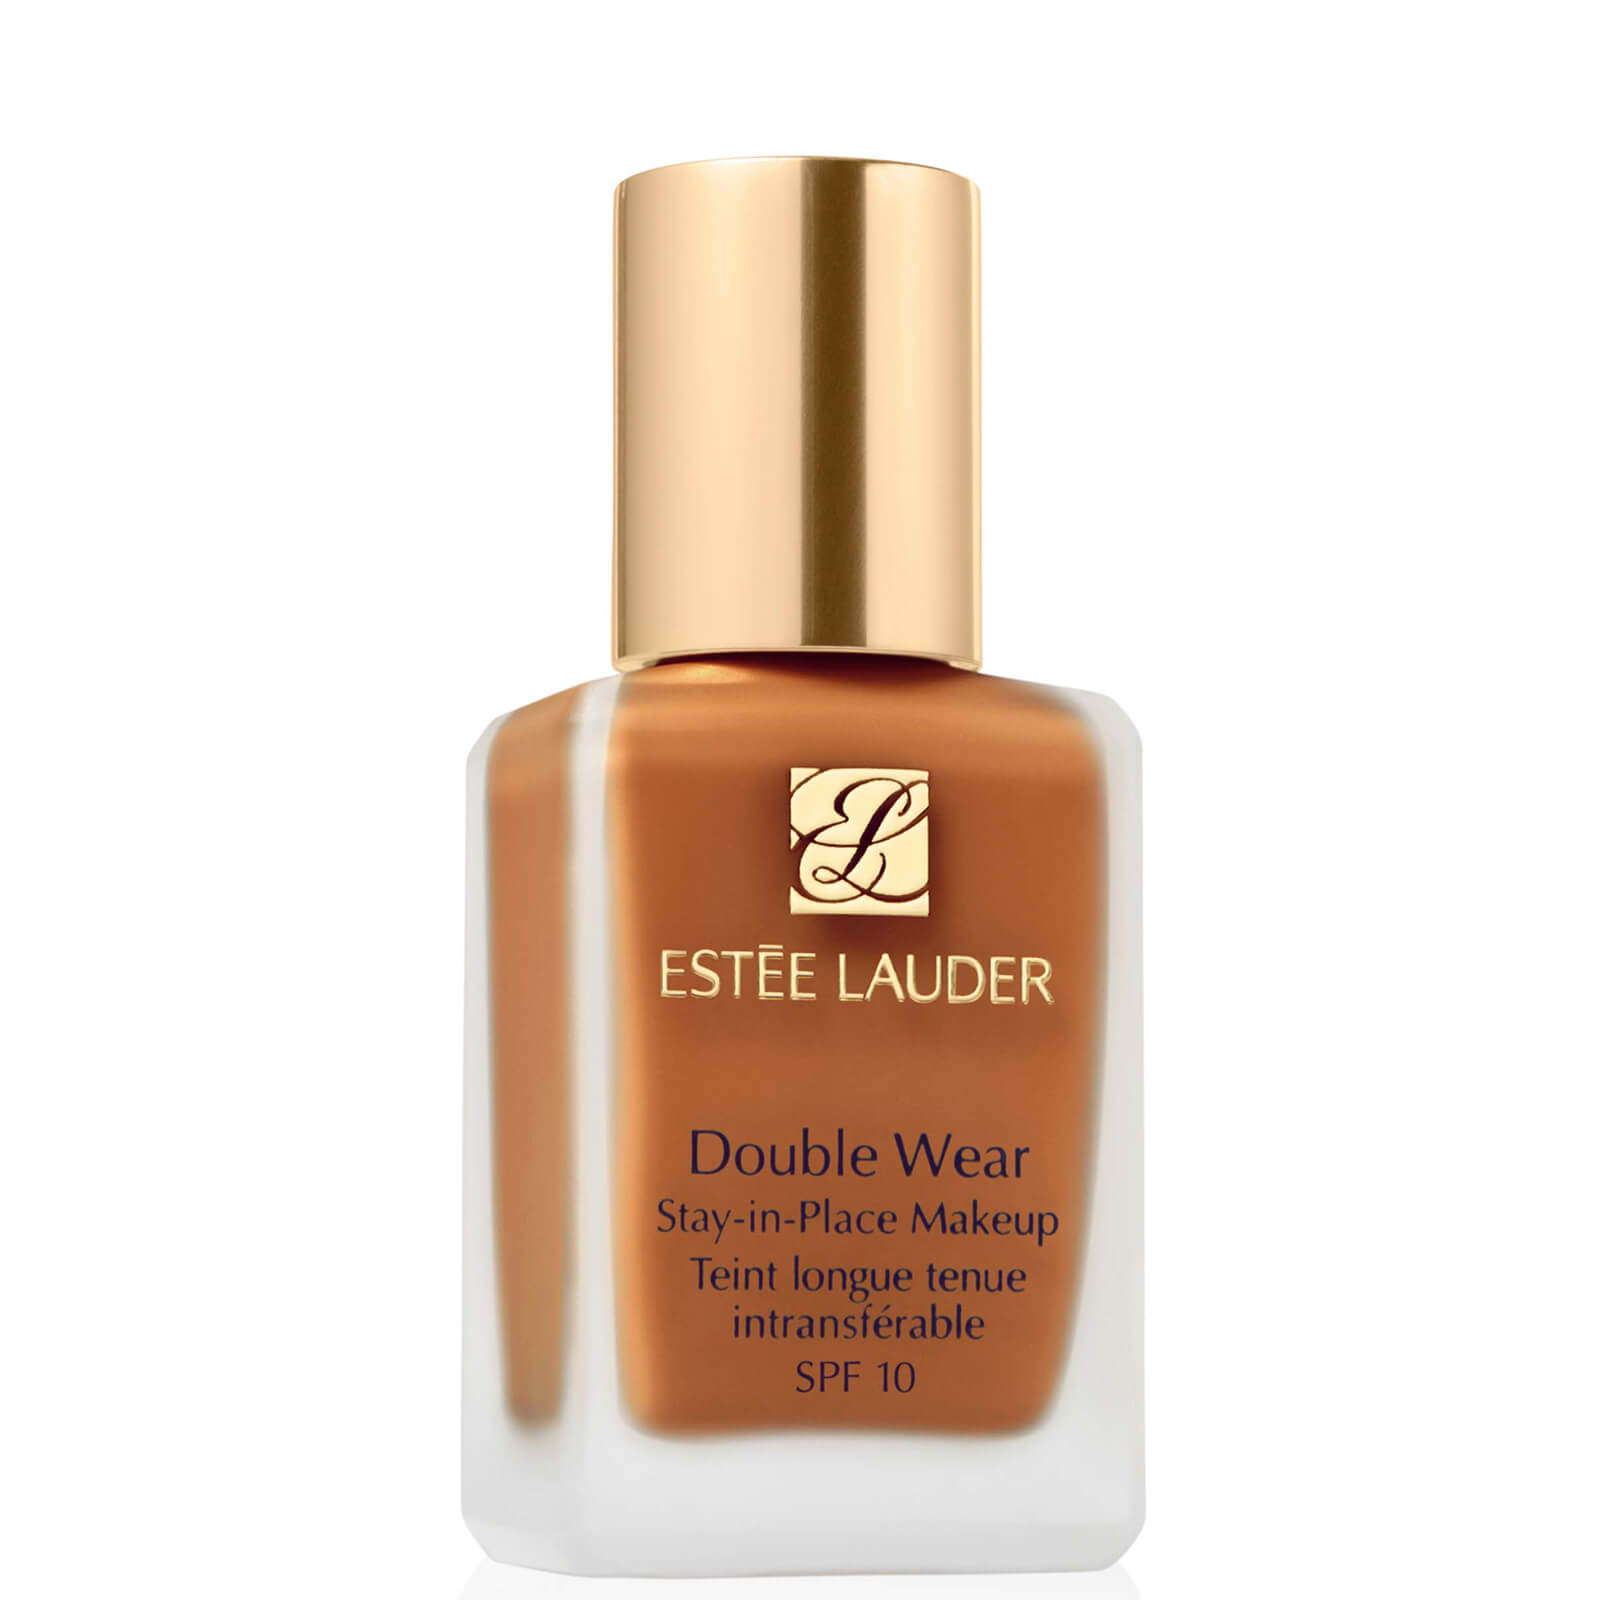 Estee Lauder Double Wear Stay-in-Place Makeup 30ml (Various Shades) - 5W1 Bronze